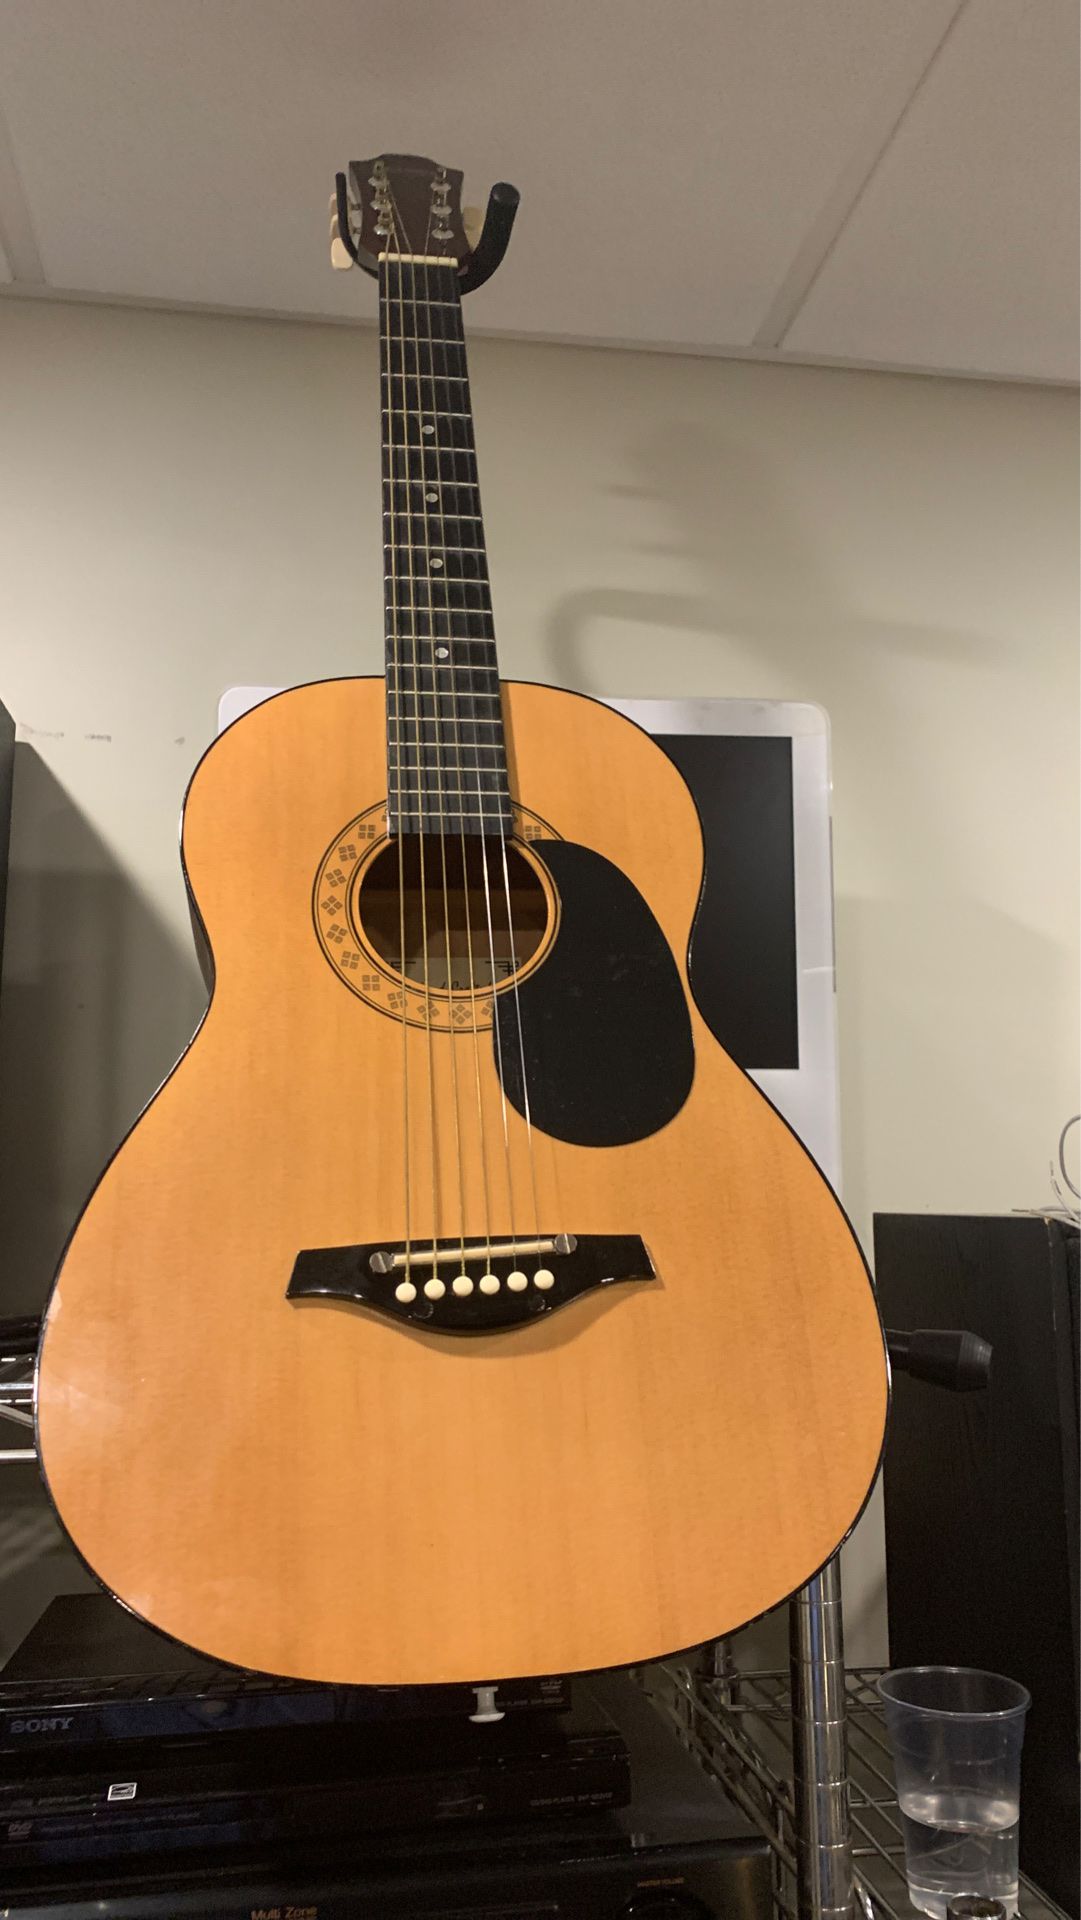 Guitar in good condition